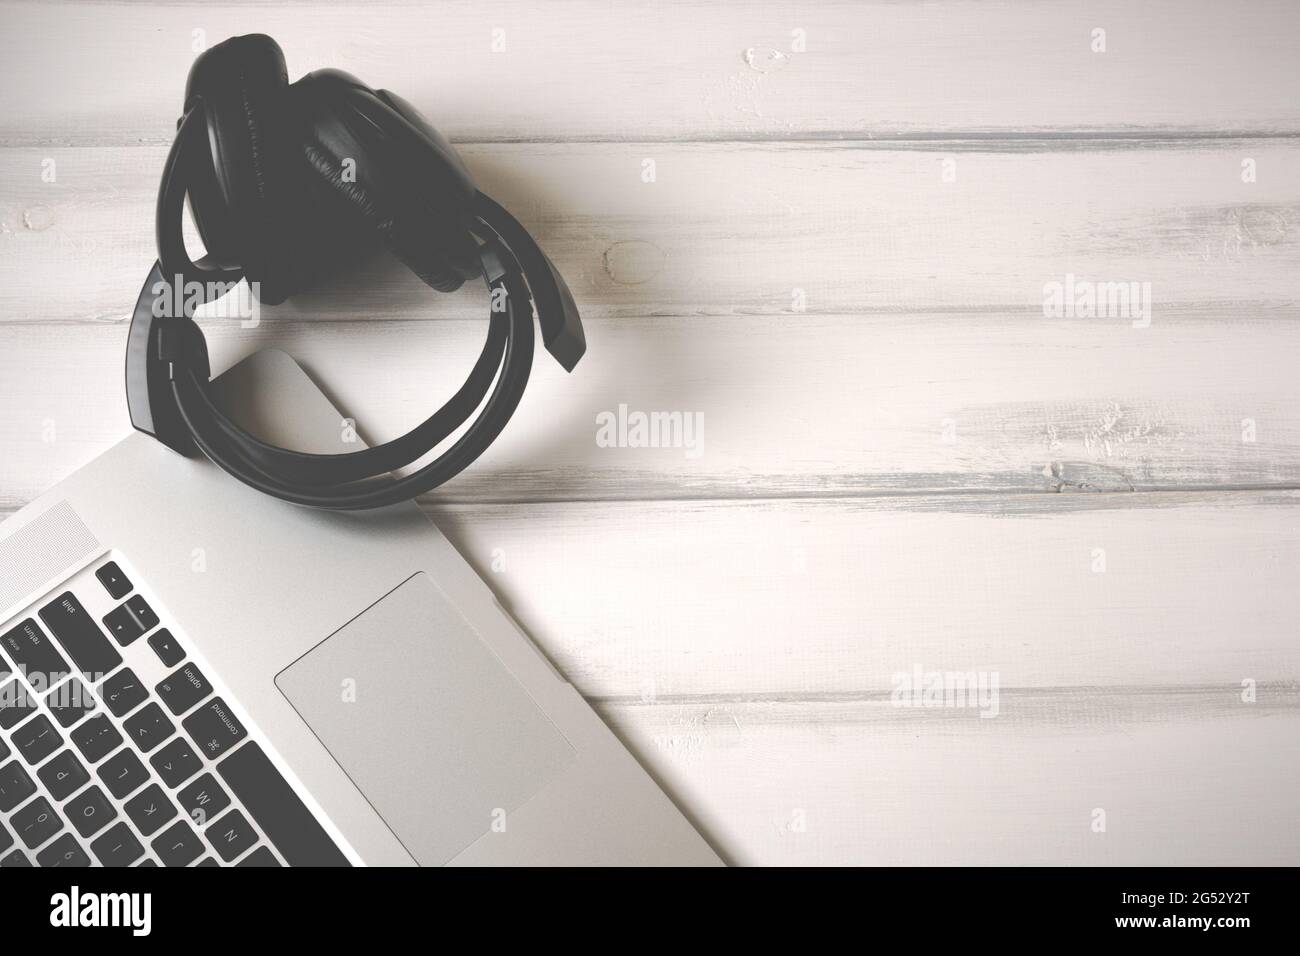 Laptop and old headphones on white wooden working desk Stock Photo